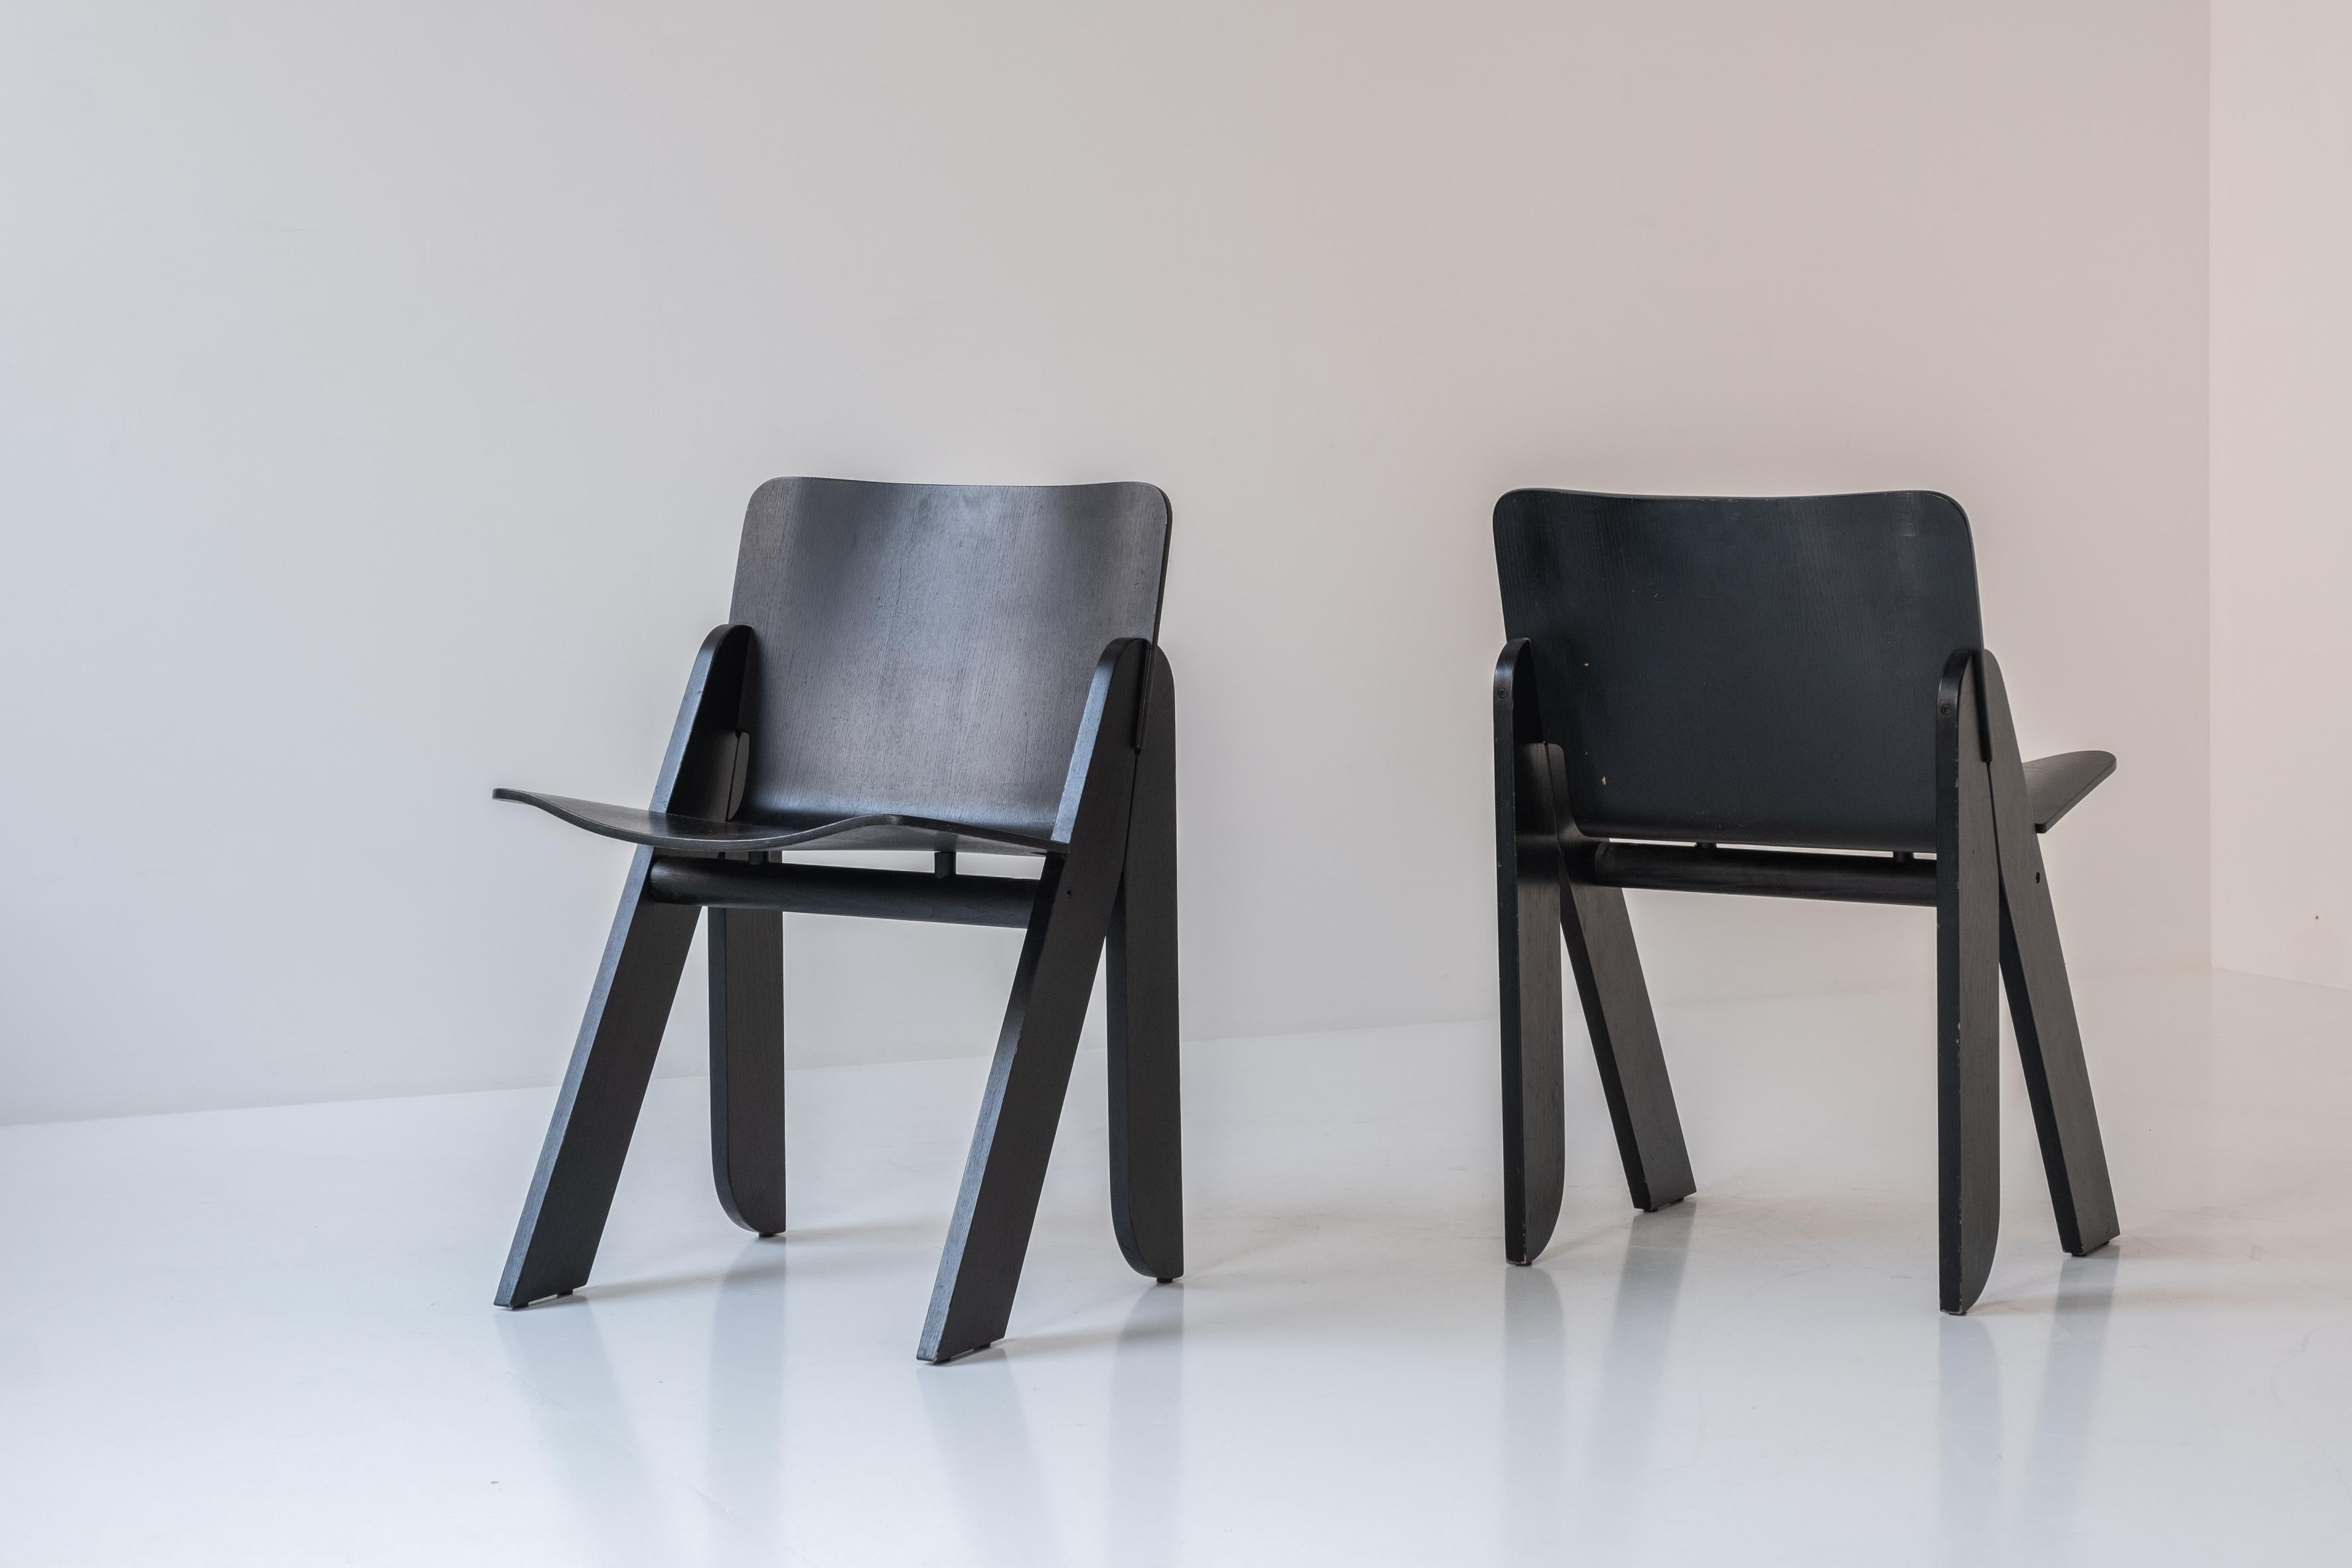 Set of four ‘Poeta’ dining chairs by Gigi Sabadin for Stilwood, Italy, 1970s. This chair is made out of moulded ash plywood and are all in a very well presented and original condition. Admire this rare black stained version which is very uncommon